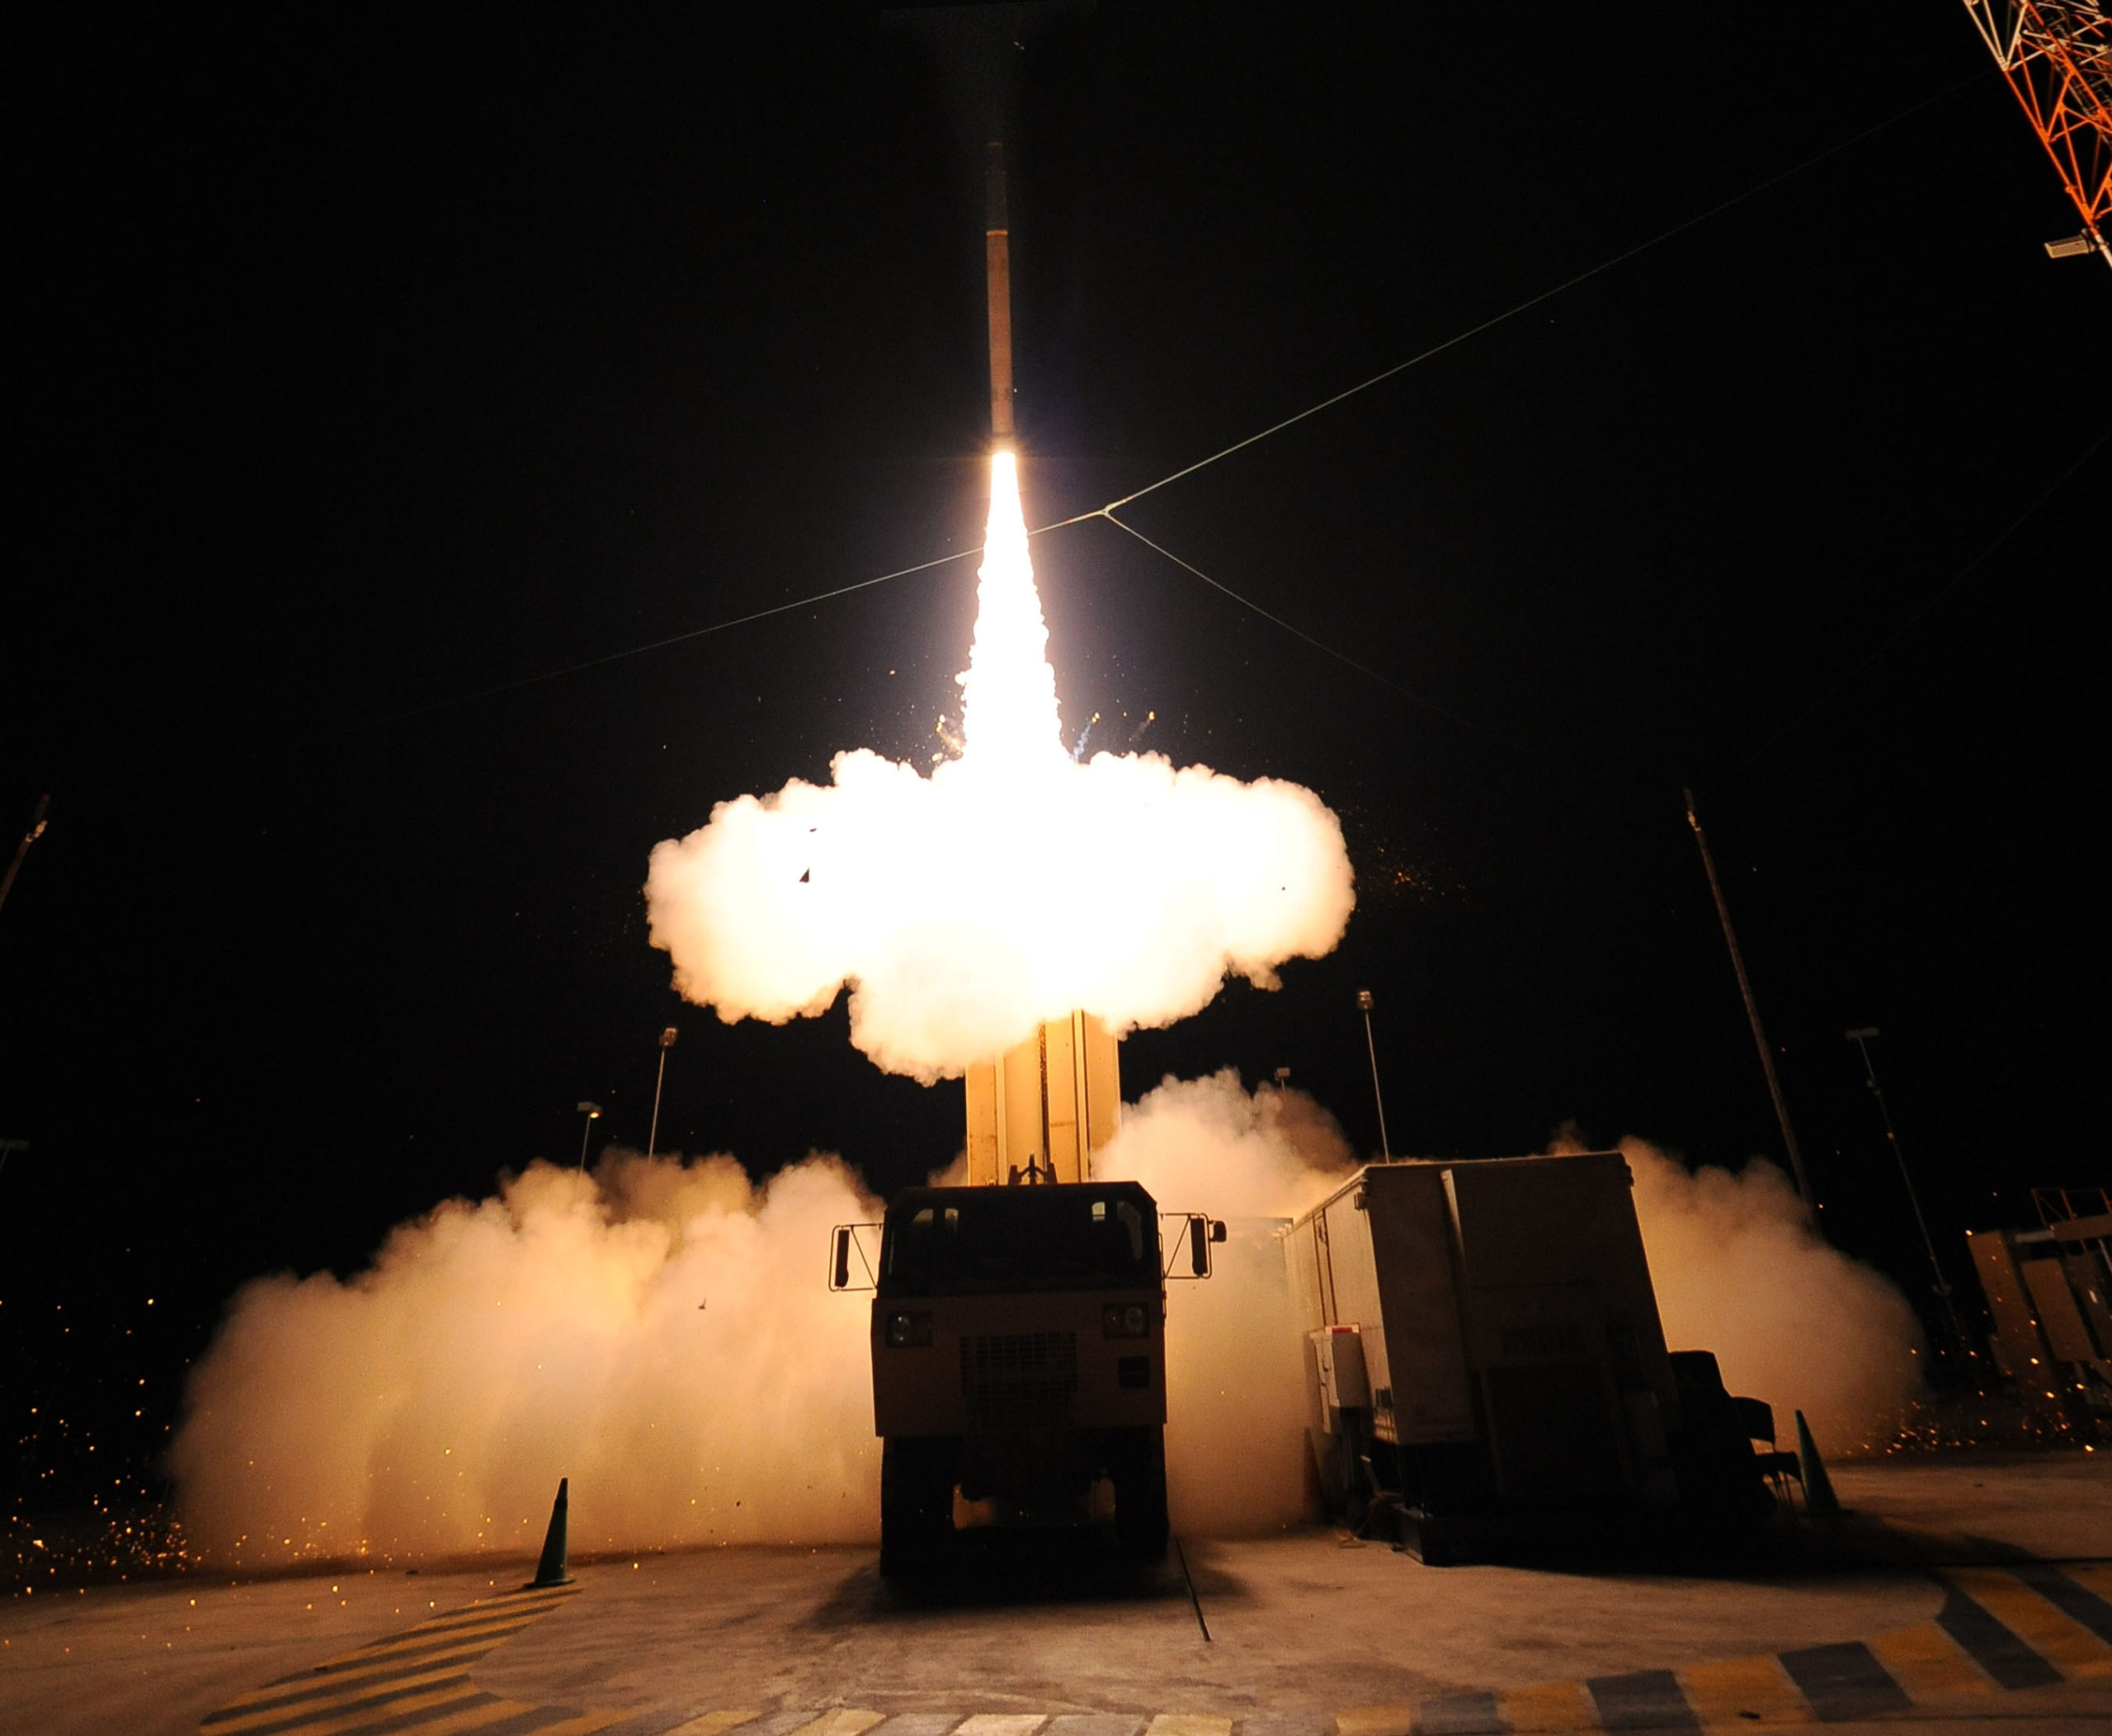 On June 29th Lockeed Martin conducted a successful flight test of the Terminal High Altitude Area Defense (THAAD) Weapon System at the Pacific Missile Range Facility on Kauai, Hawaii.  (PRNewsFoto/Lockheed Martin)